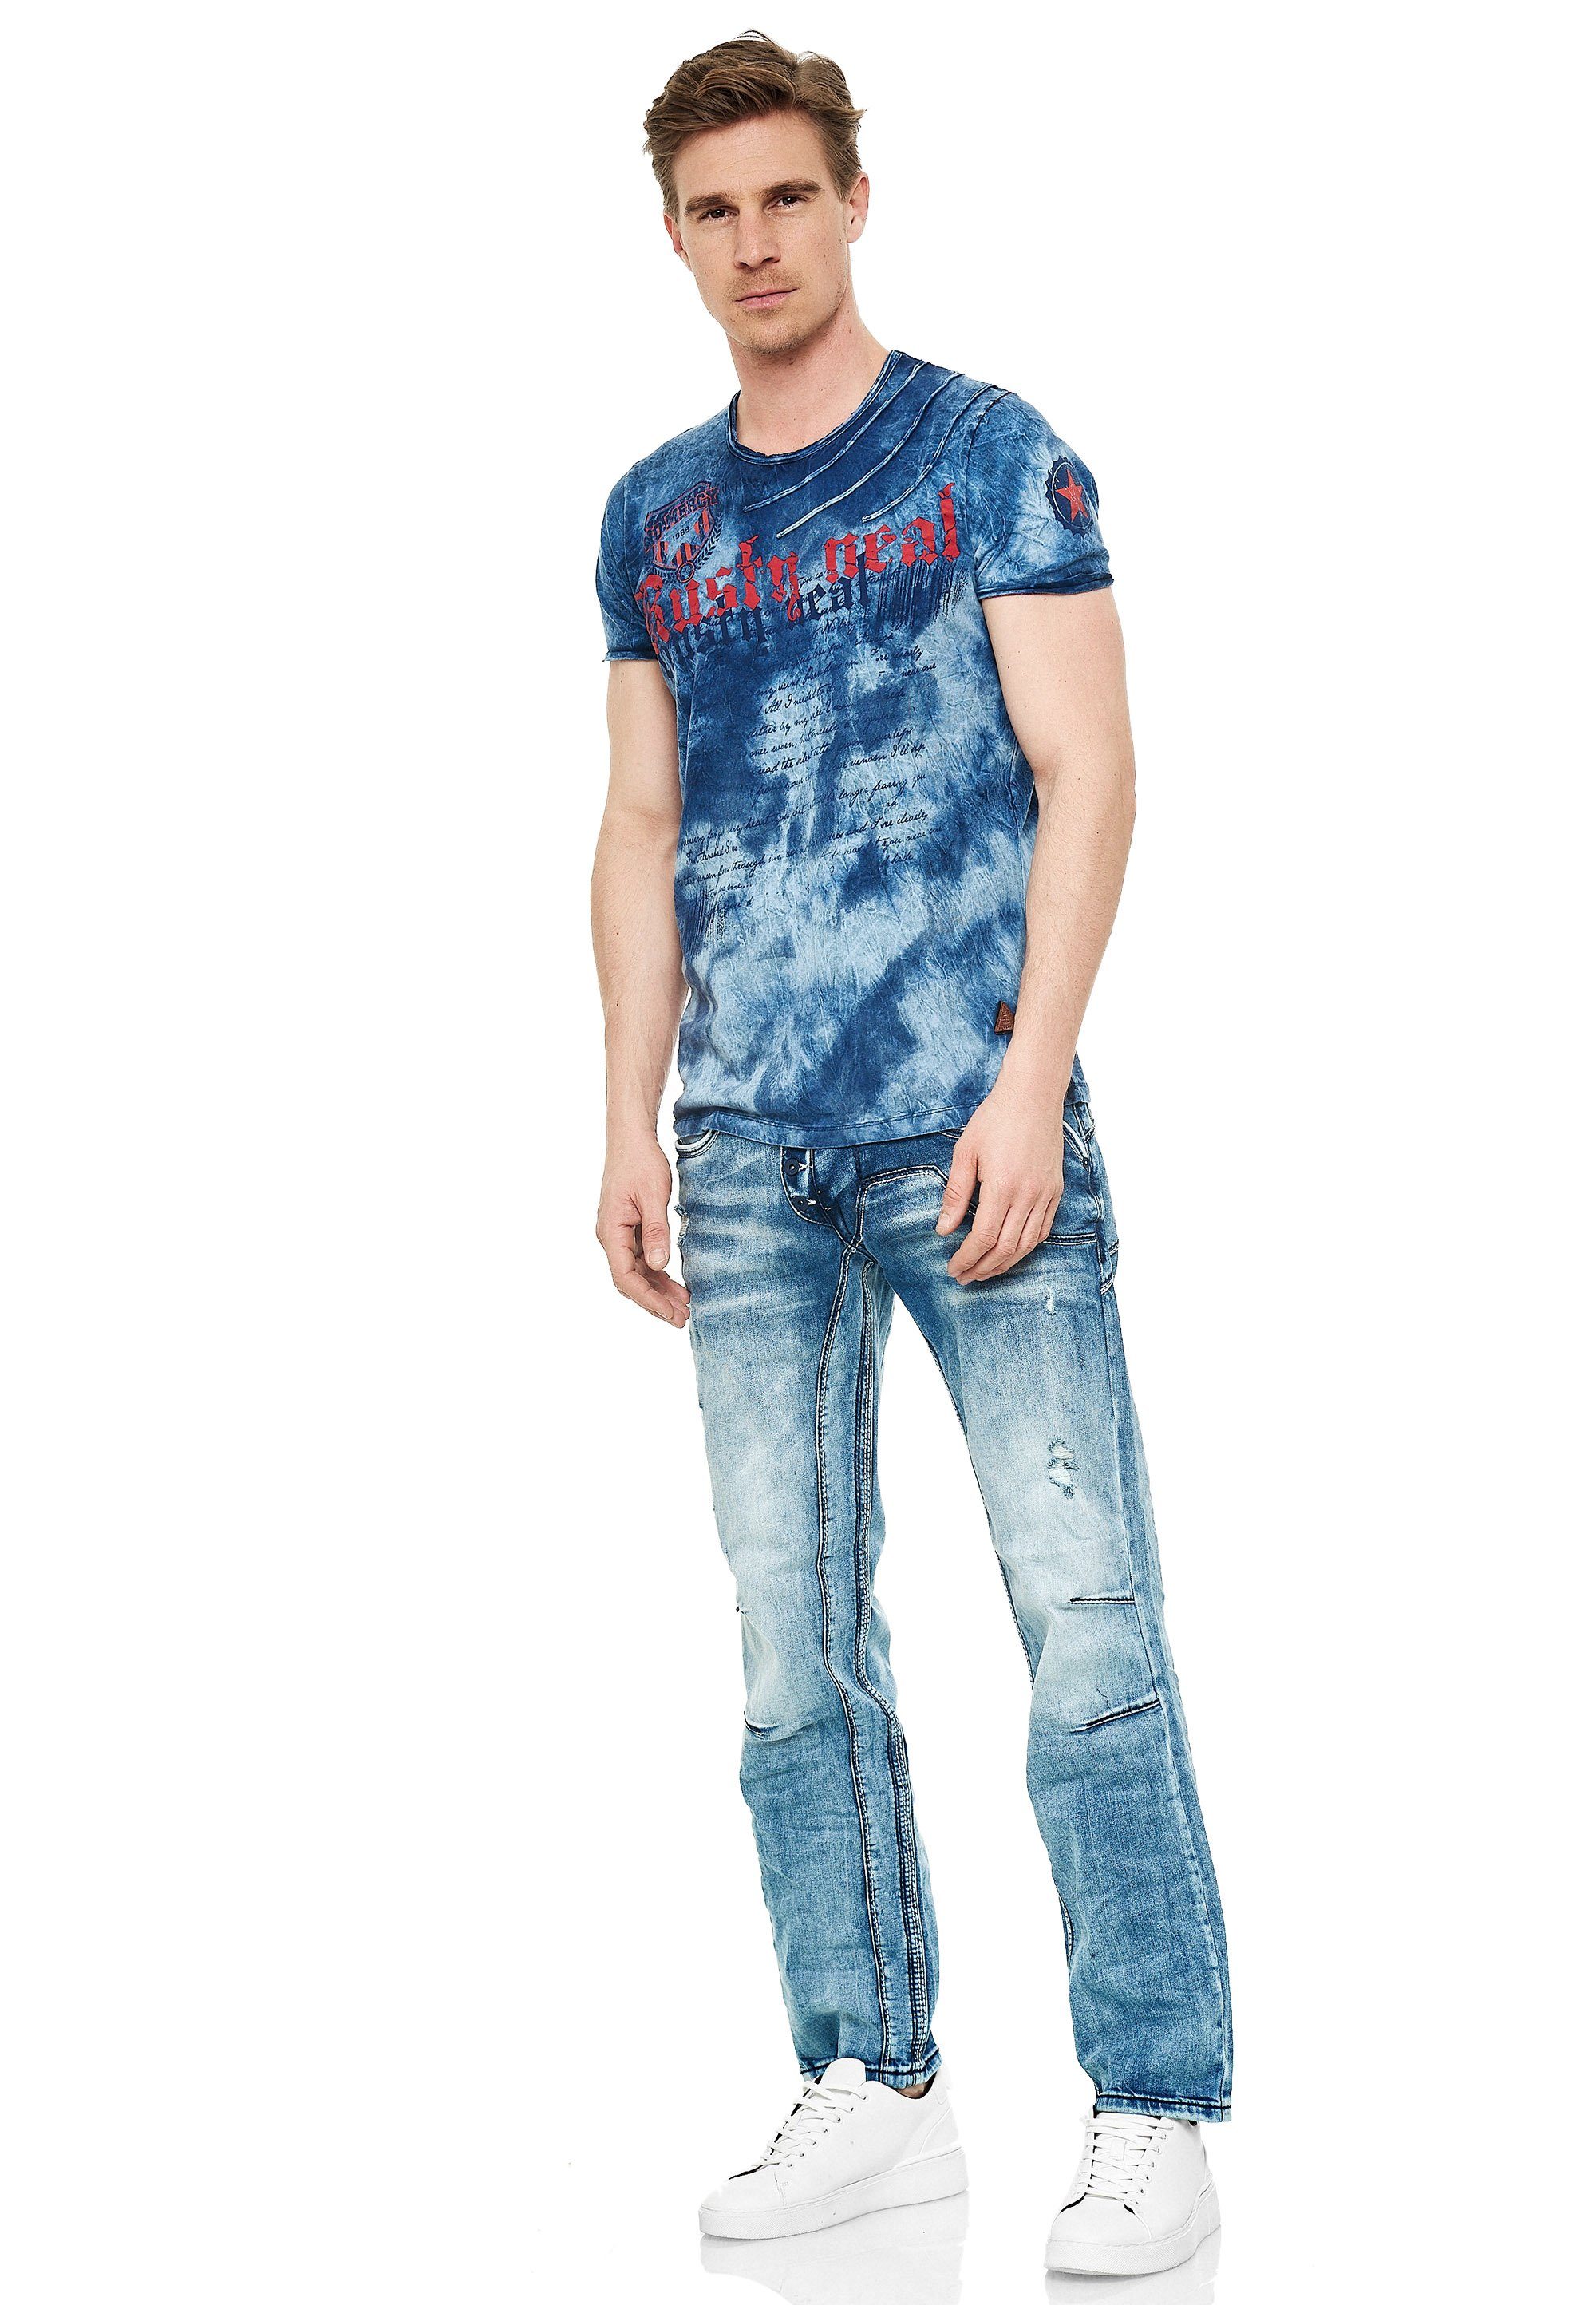 Bequeme Waschung cooler Jeans mit Rusty Neal